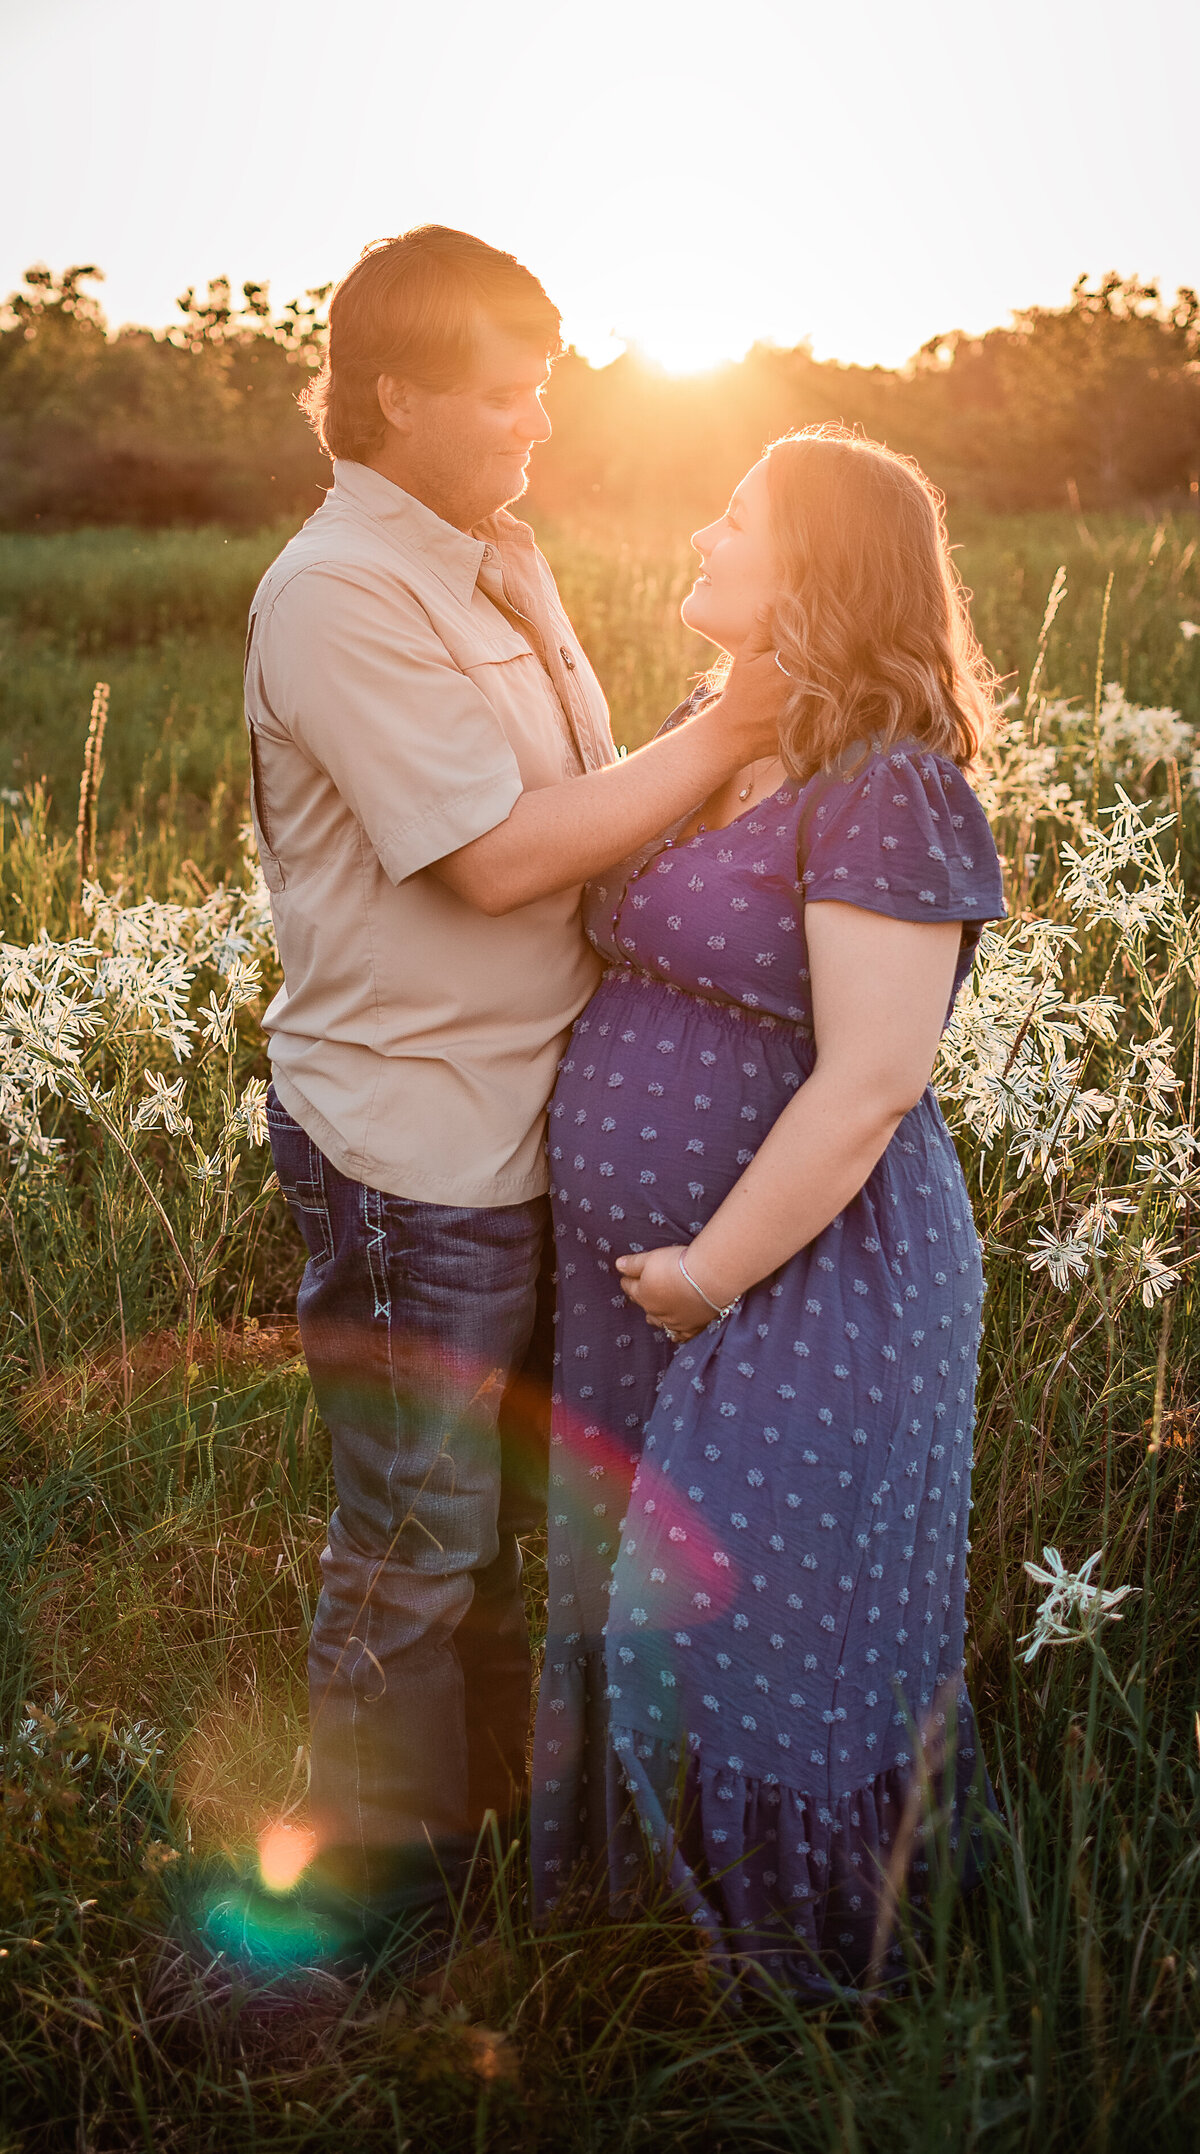 A mom and dad to be look at each other and smile in a field at sunset.